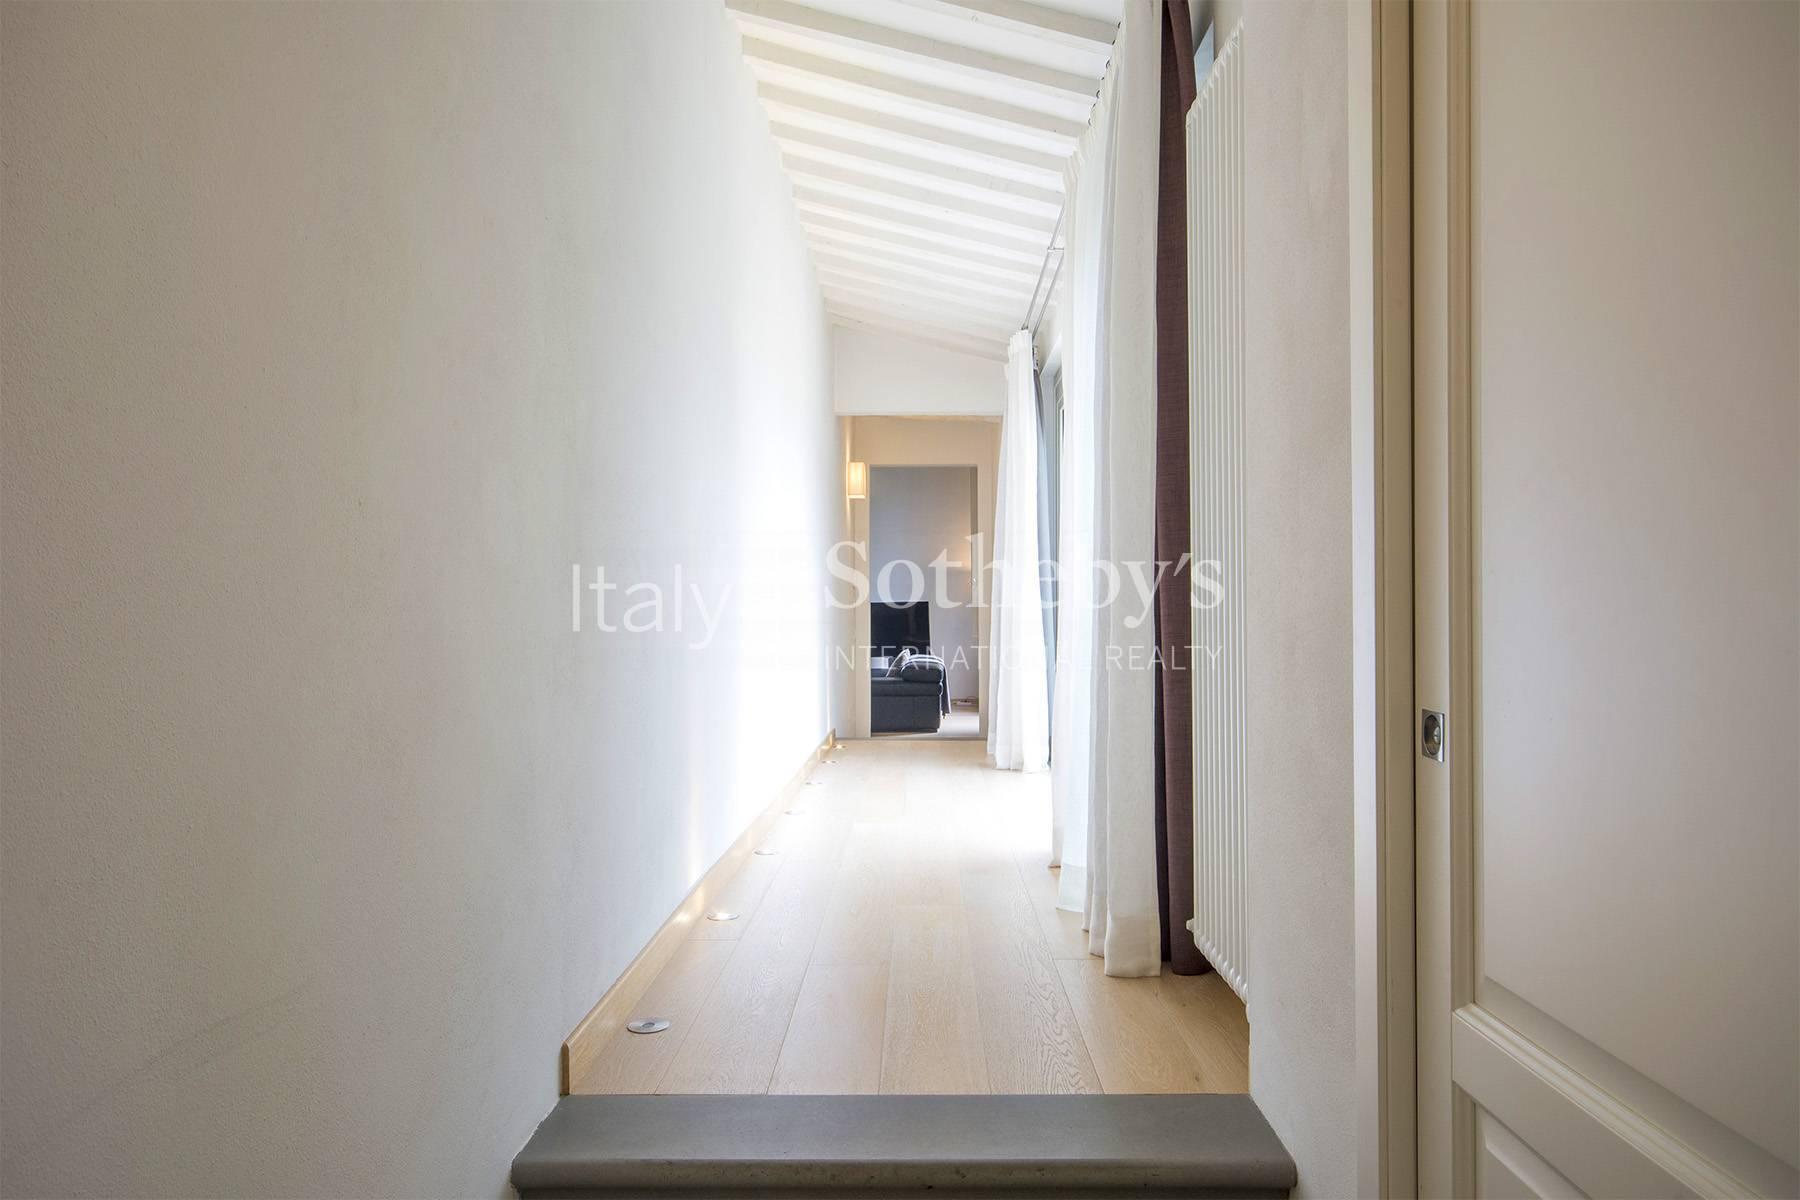 Lovely modern apartment in the Oltrarno district - 13